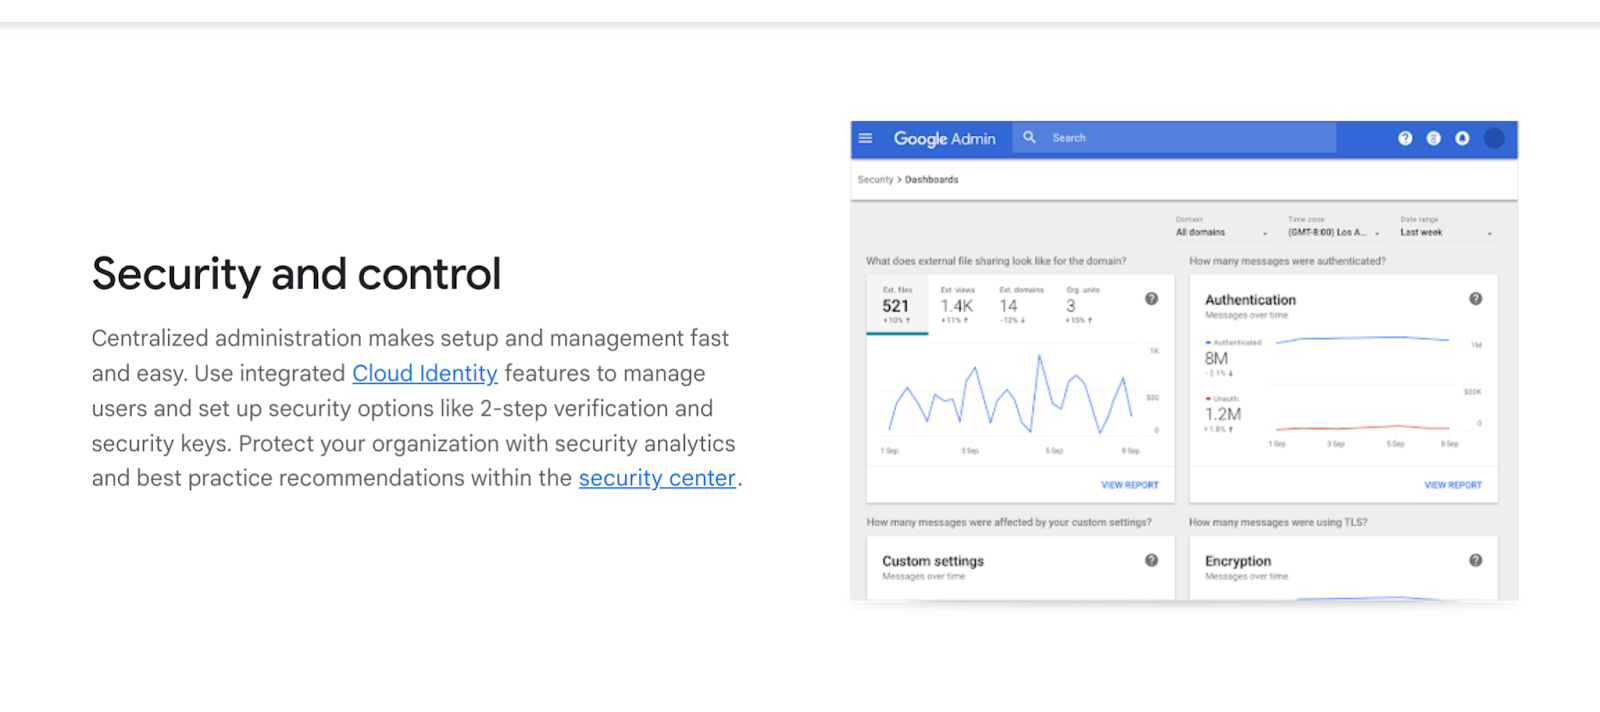 Security and control settings - Gmail admin search console